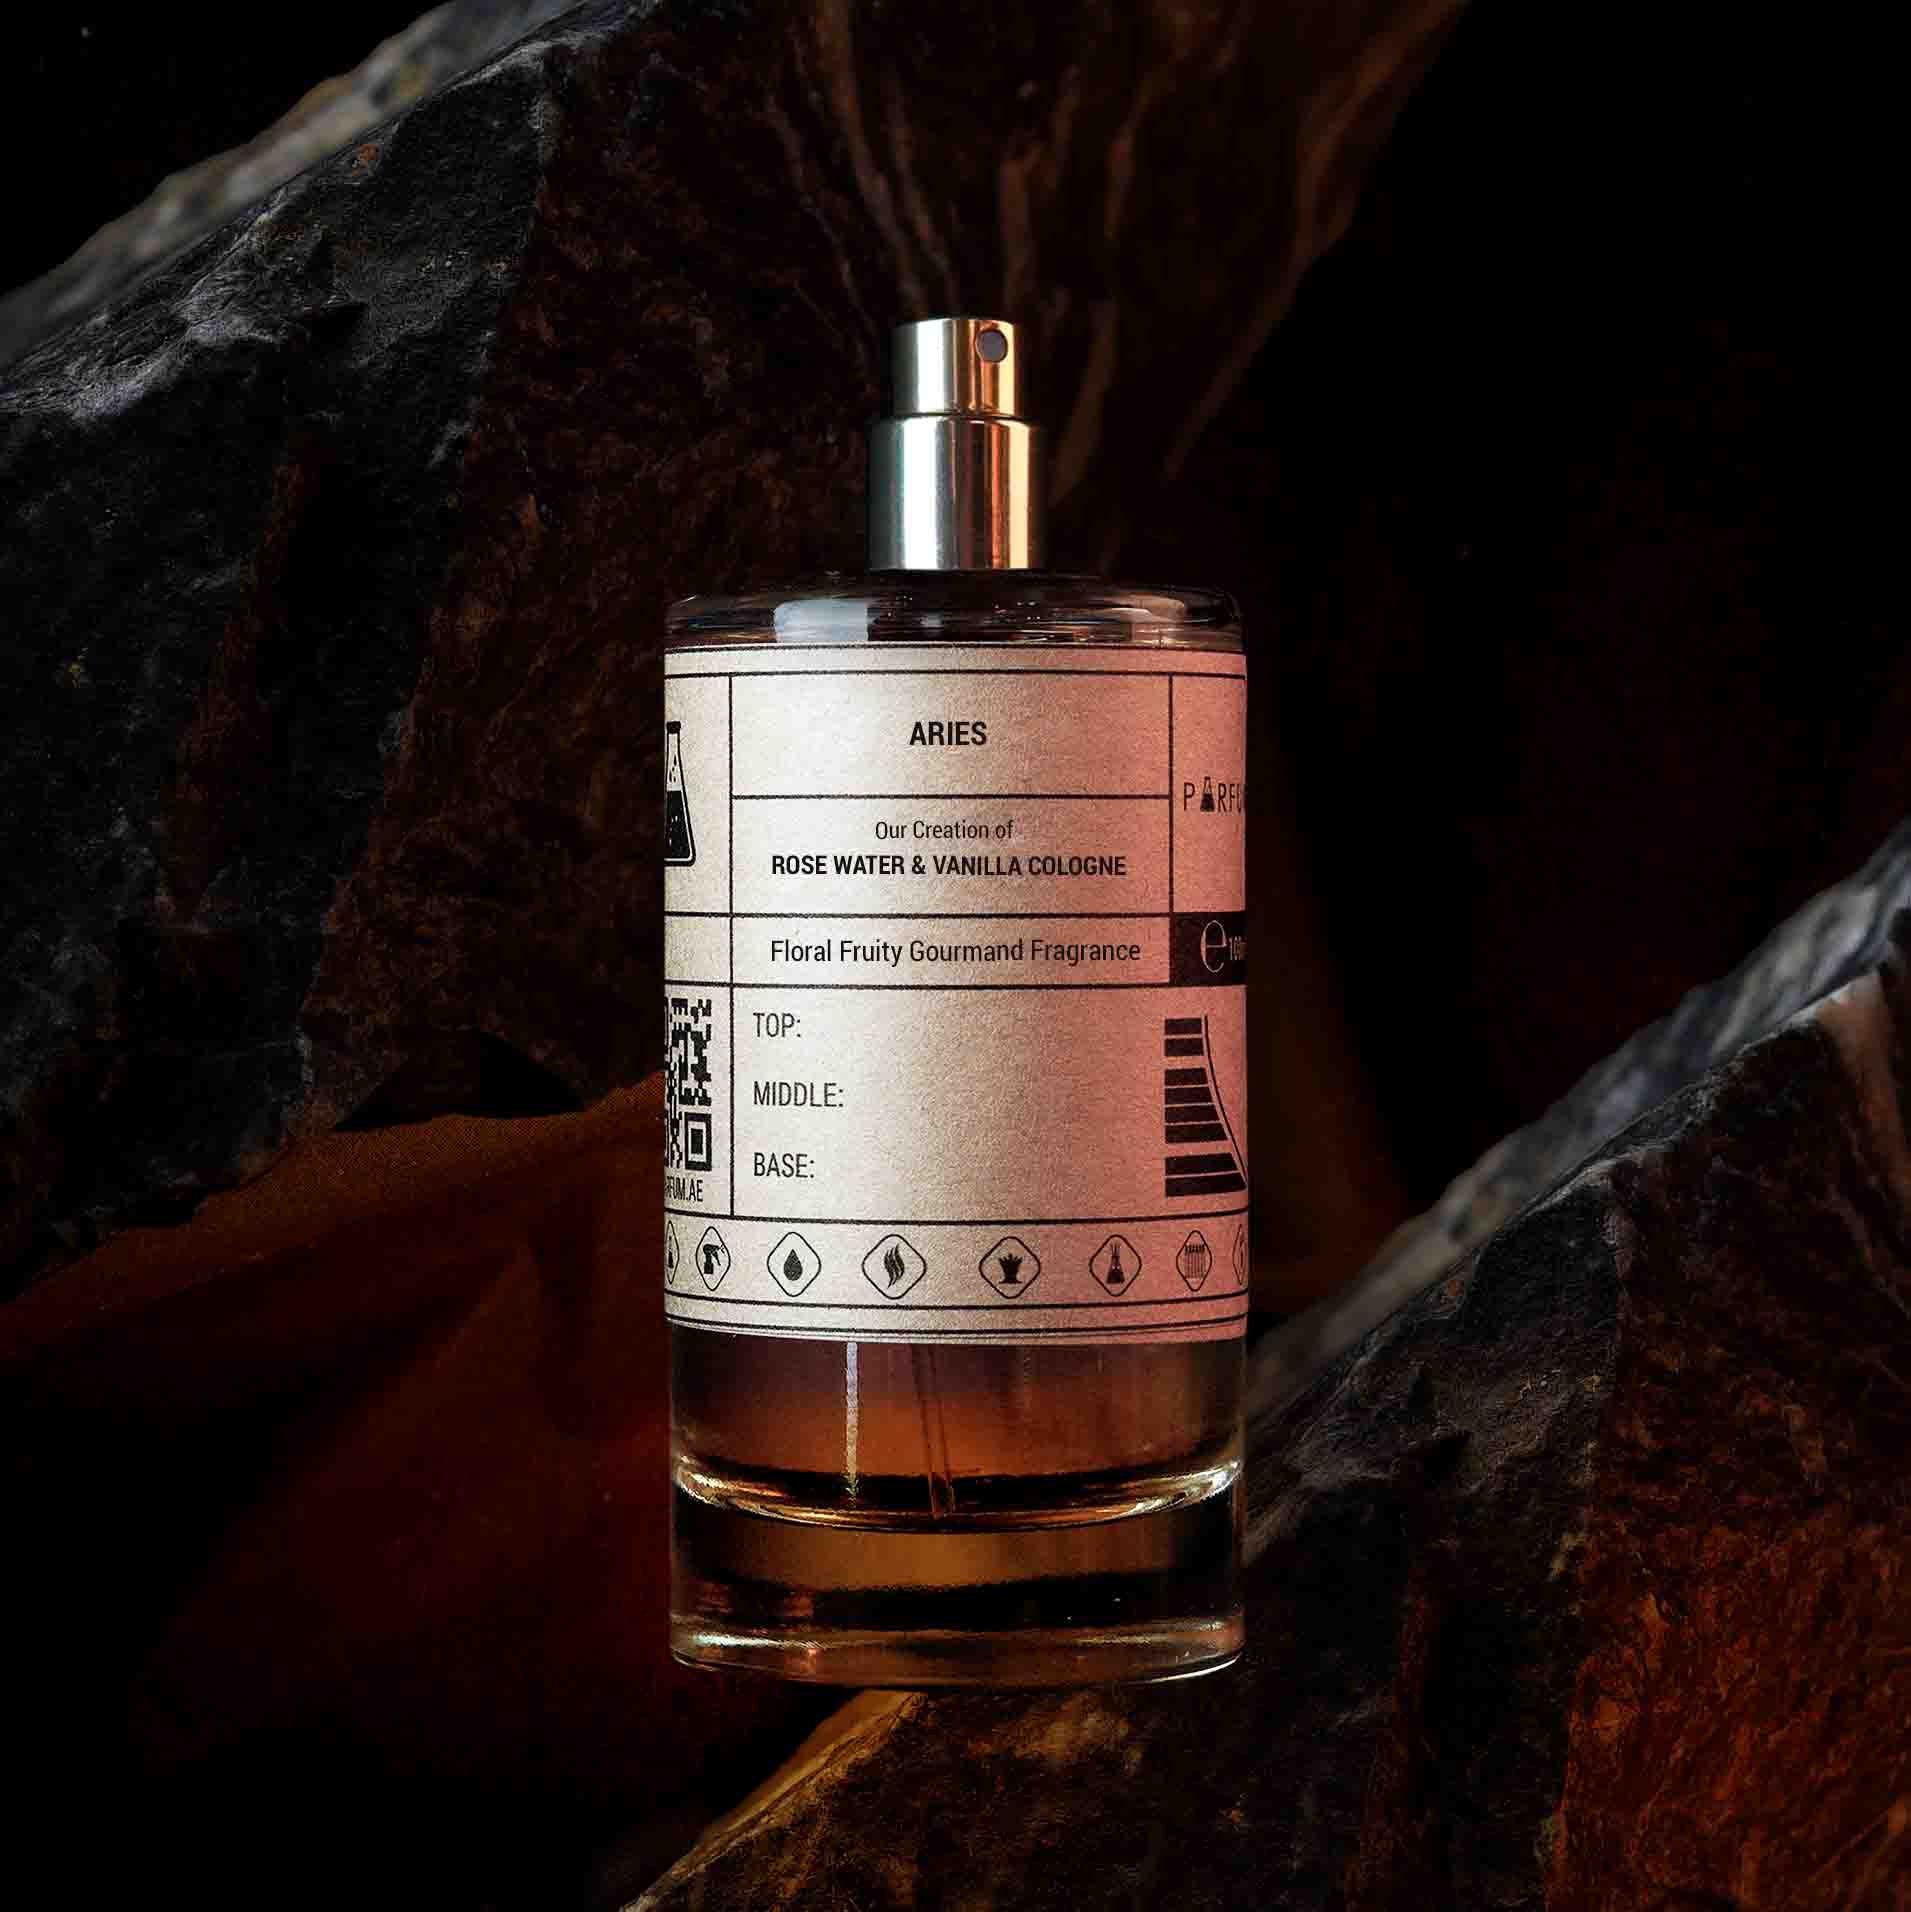 Our Creation of Jo Malone London's Rose Water & Vanilla Cologne